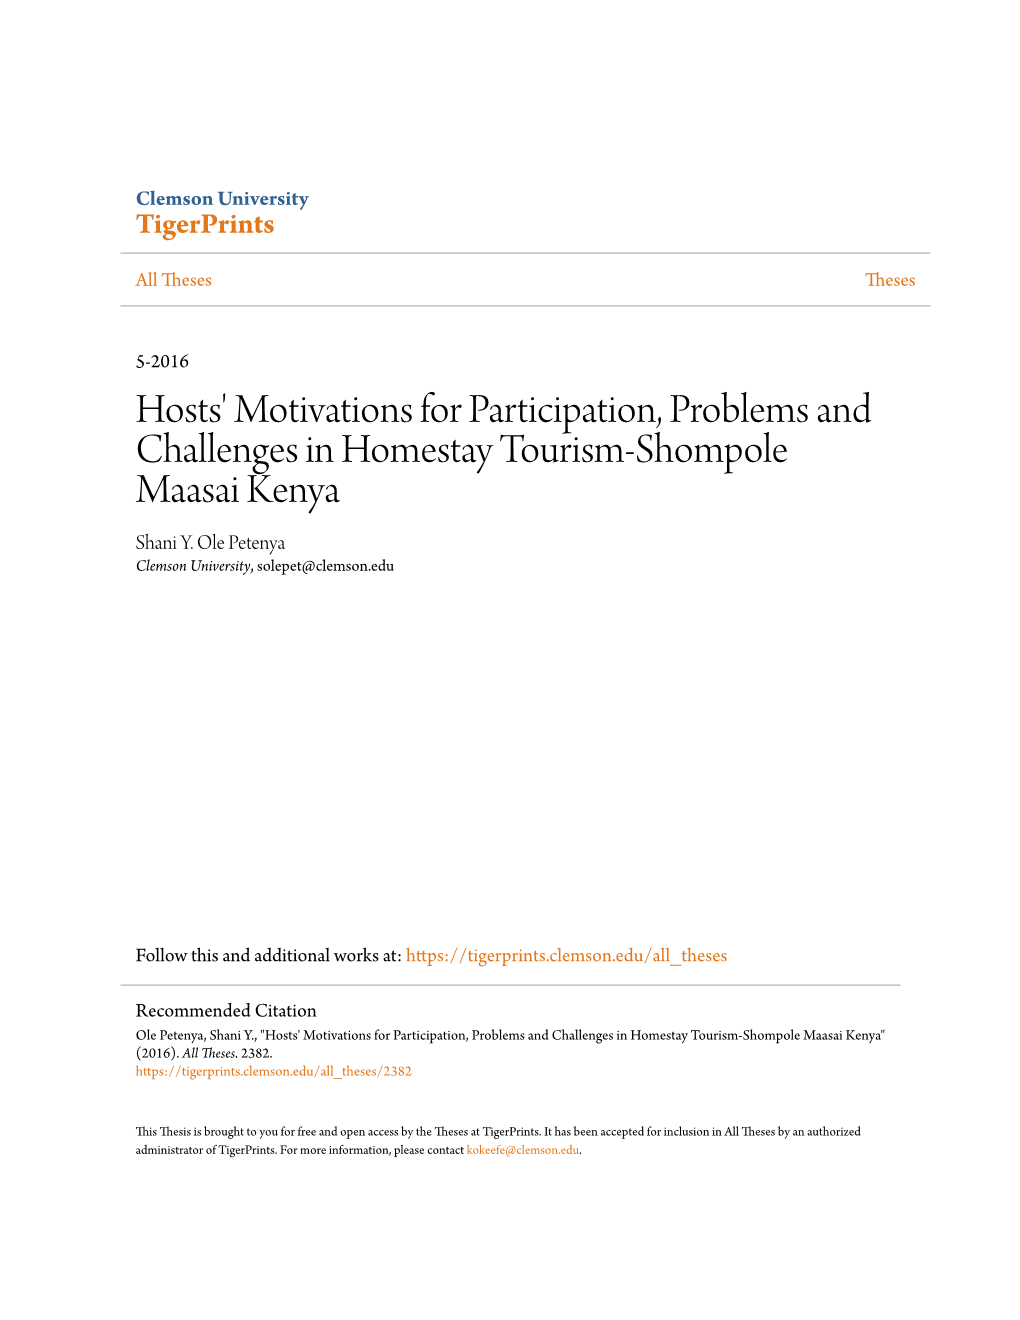 Hosts' Motivations for Participation, Problems and Challenges in Homestay Tourism-Shompole Maasai Kenya Shani Y